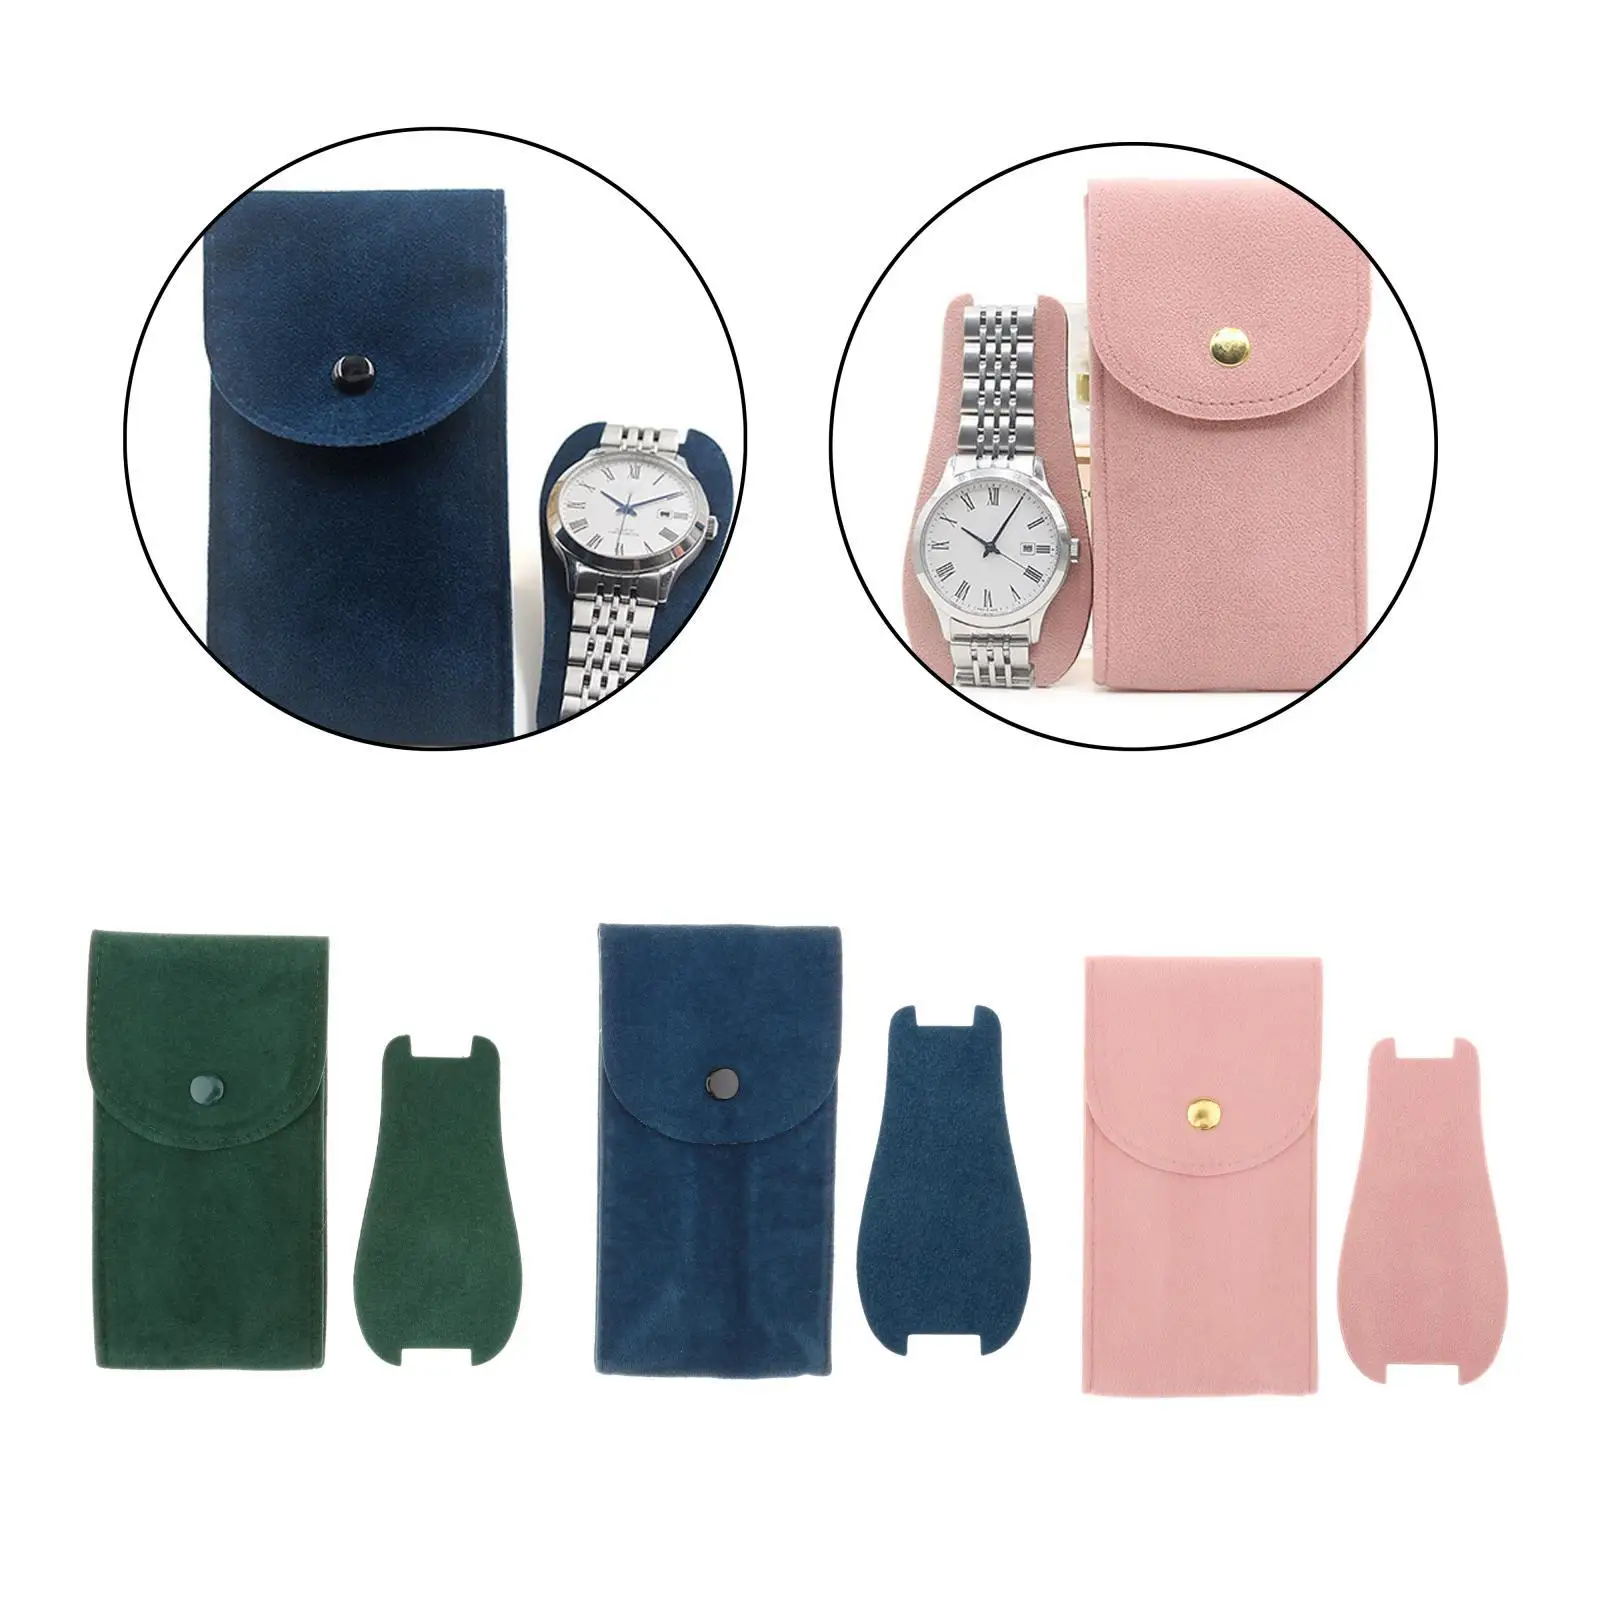  Chic Leather Organizer Watch Storage Bag Nubuck Case for Watches And  Watch Jewelry Accessory Collect Boxes